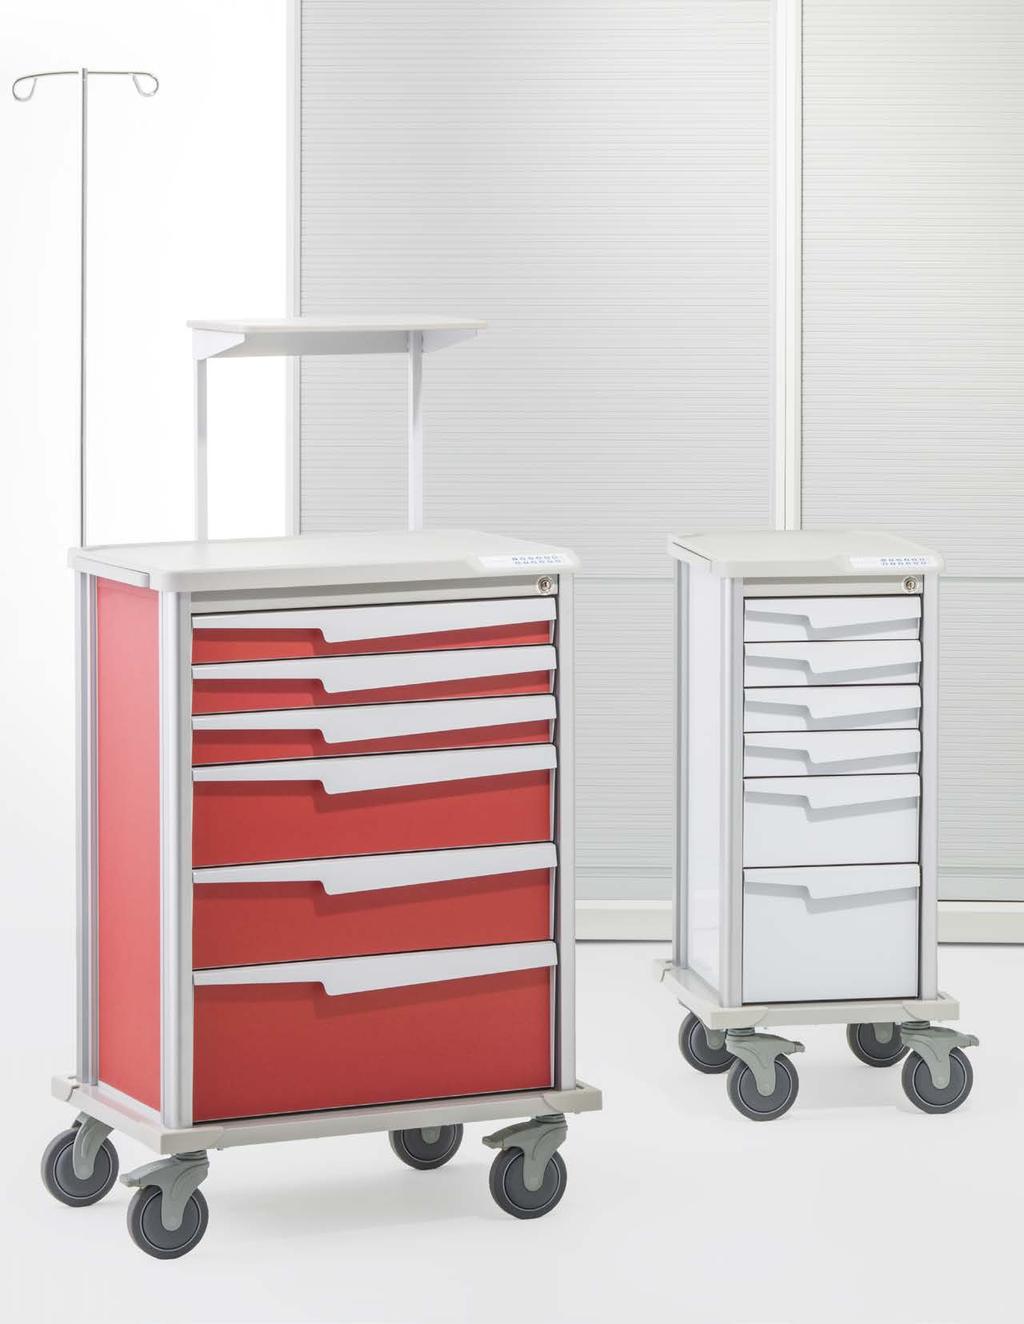 2 Products shown, from left: Tempo 30 with 3 3, 2 6, and 1 9 drawer configuration; Tempo N27 with 4 3, 1 6,